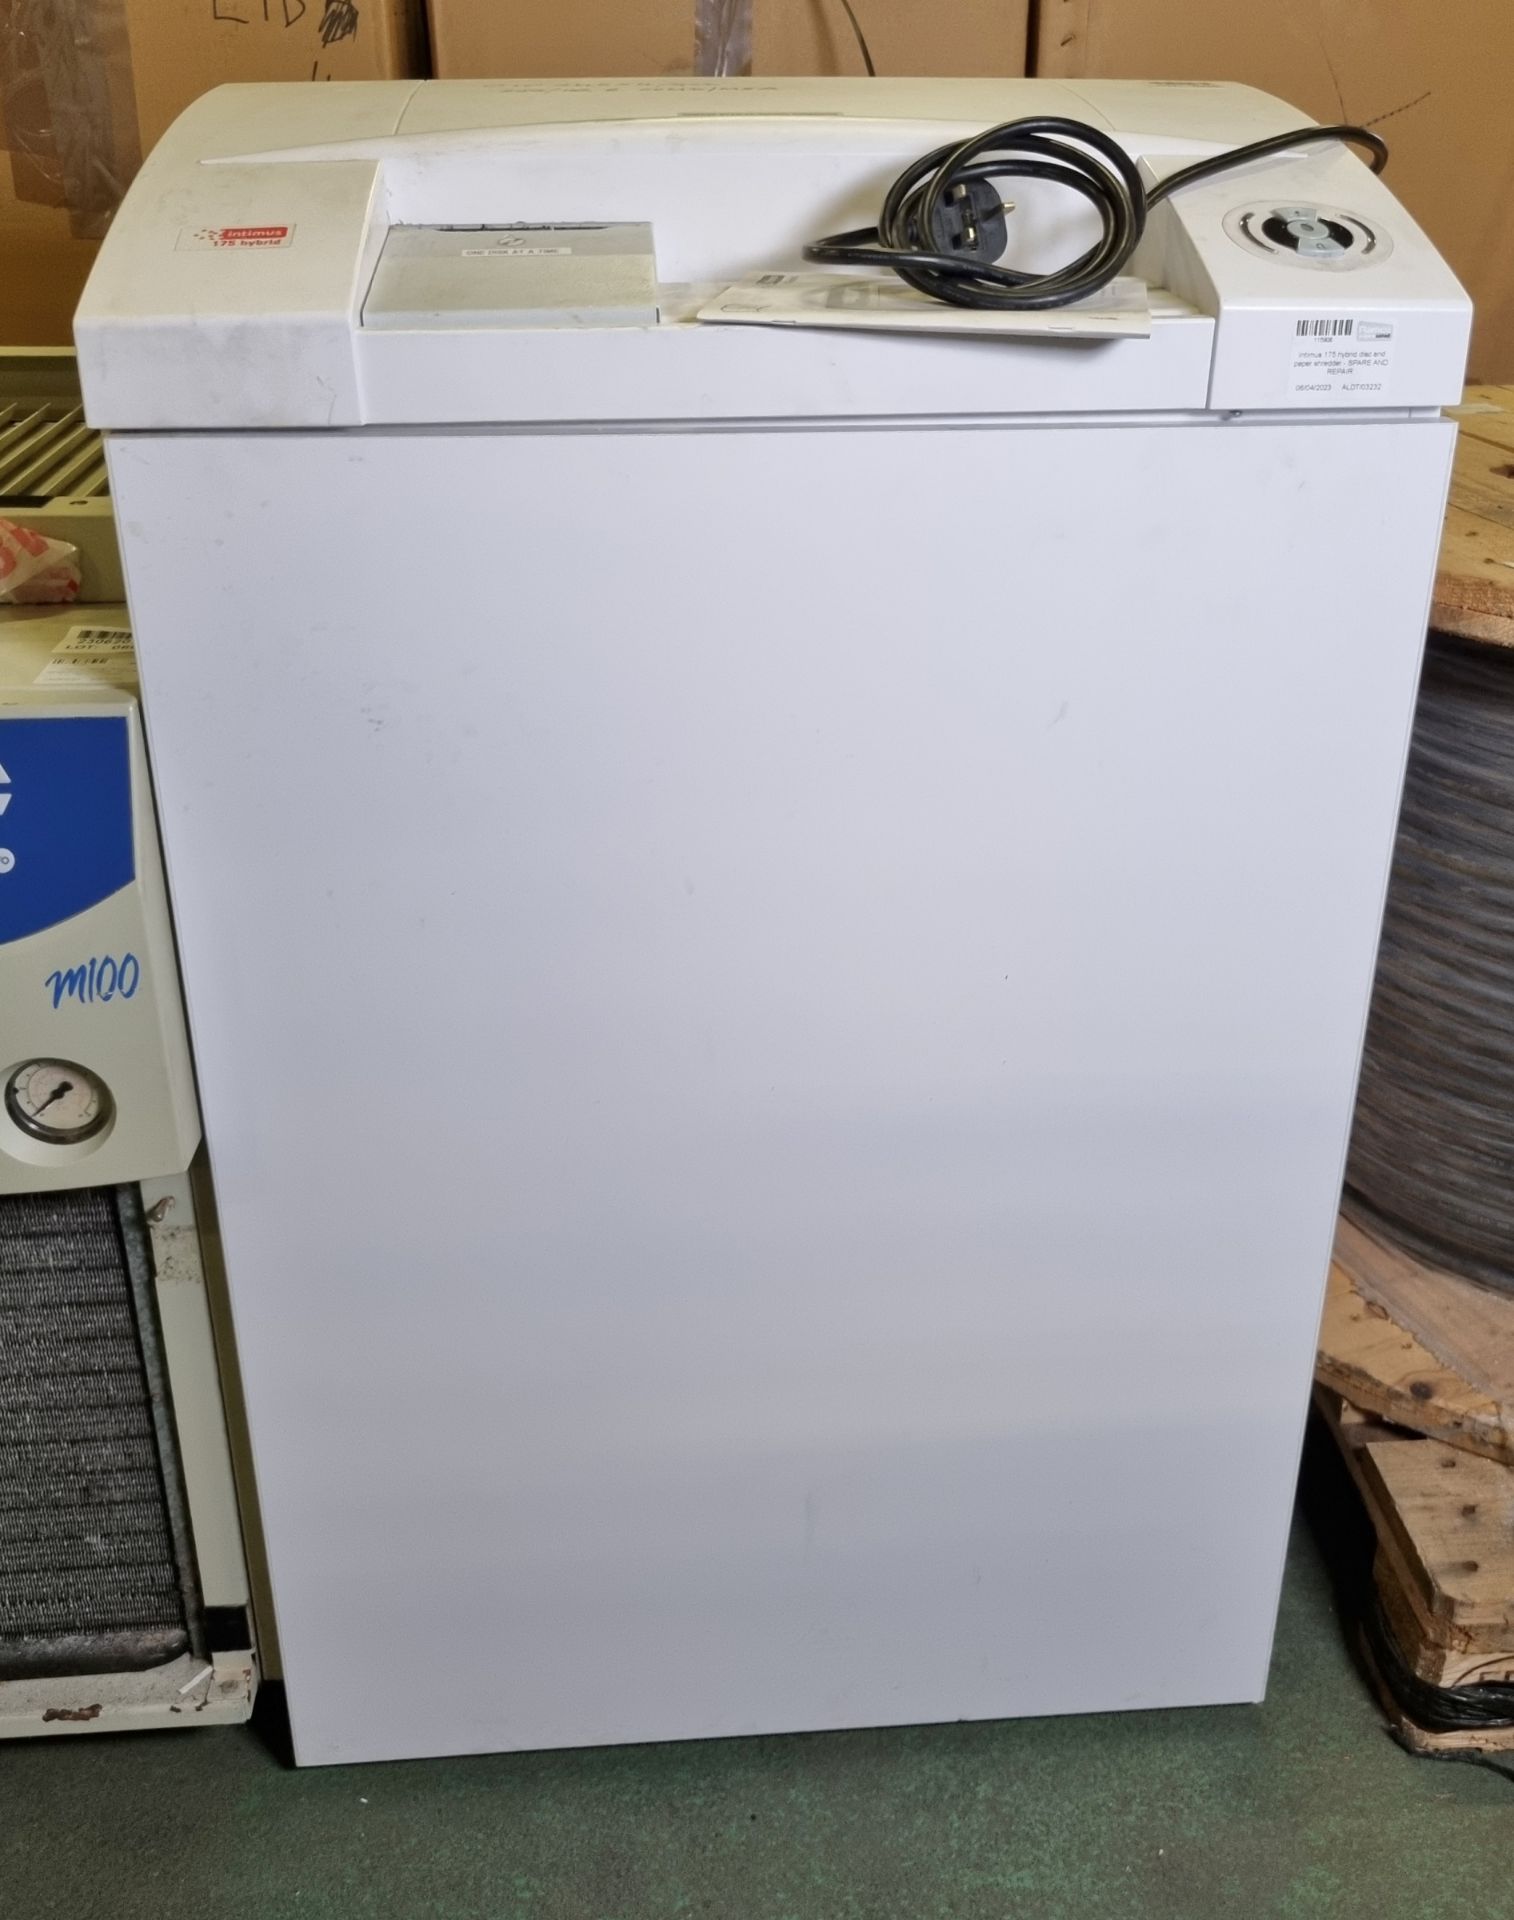 Intimus 175 hybrid disc and paper shredder - SPARES AND REPAIRS